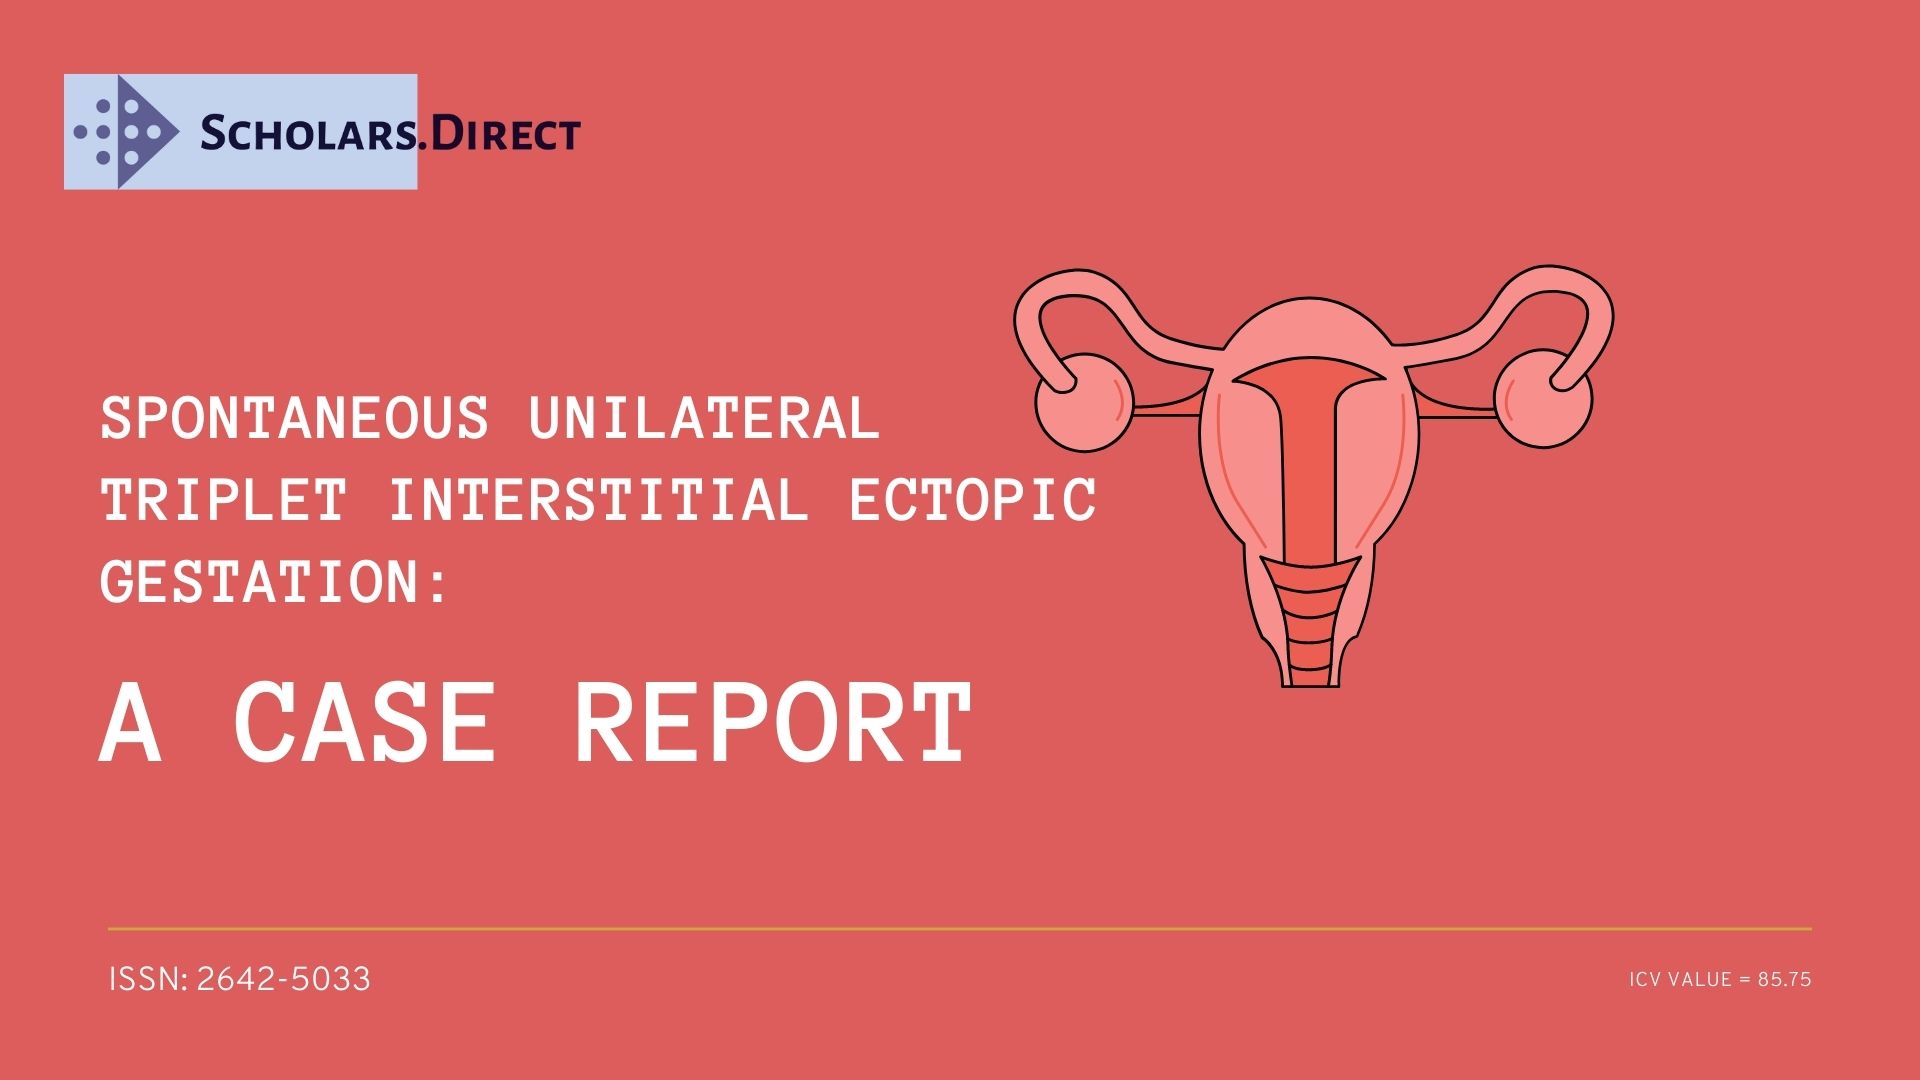 Journal of Gynecology